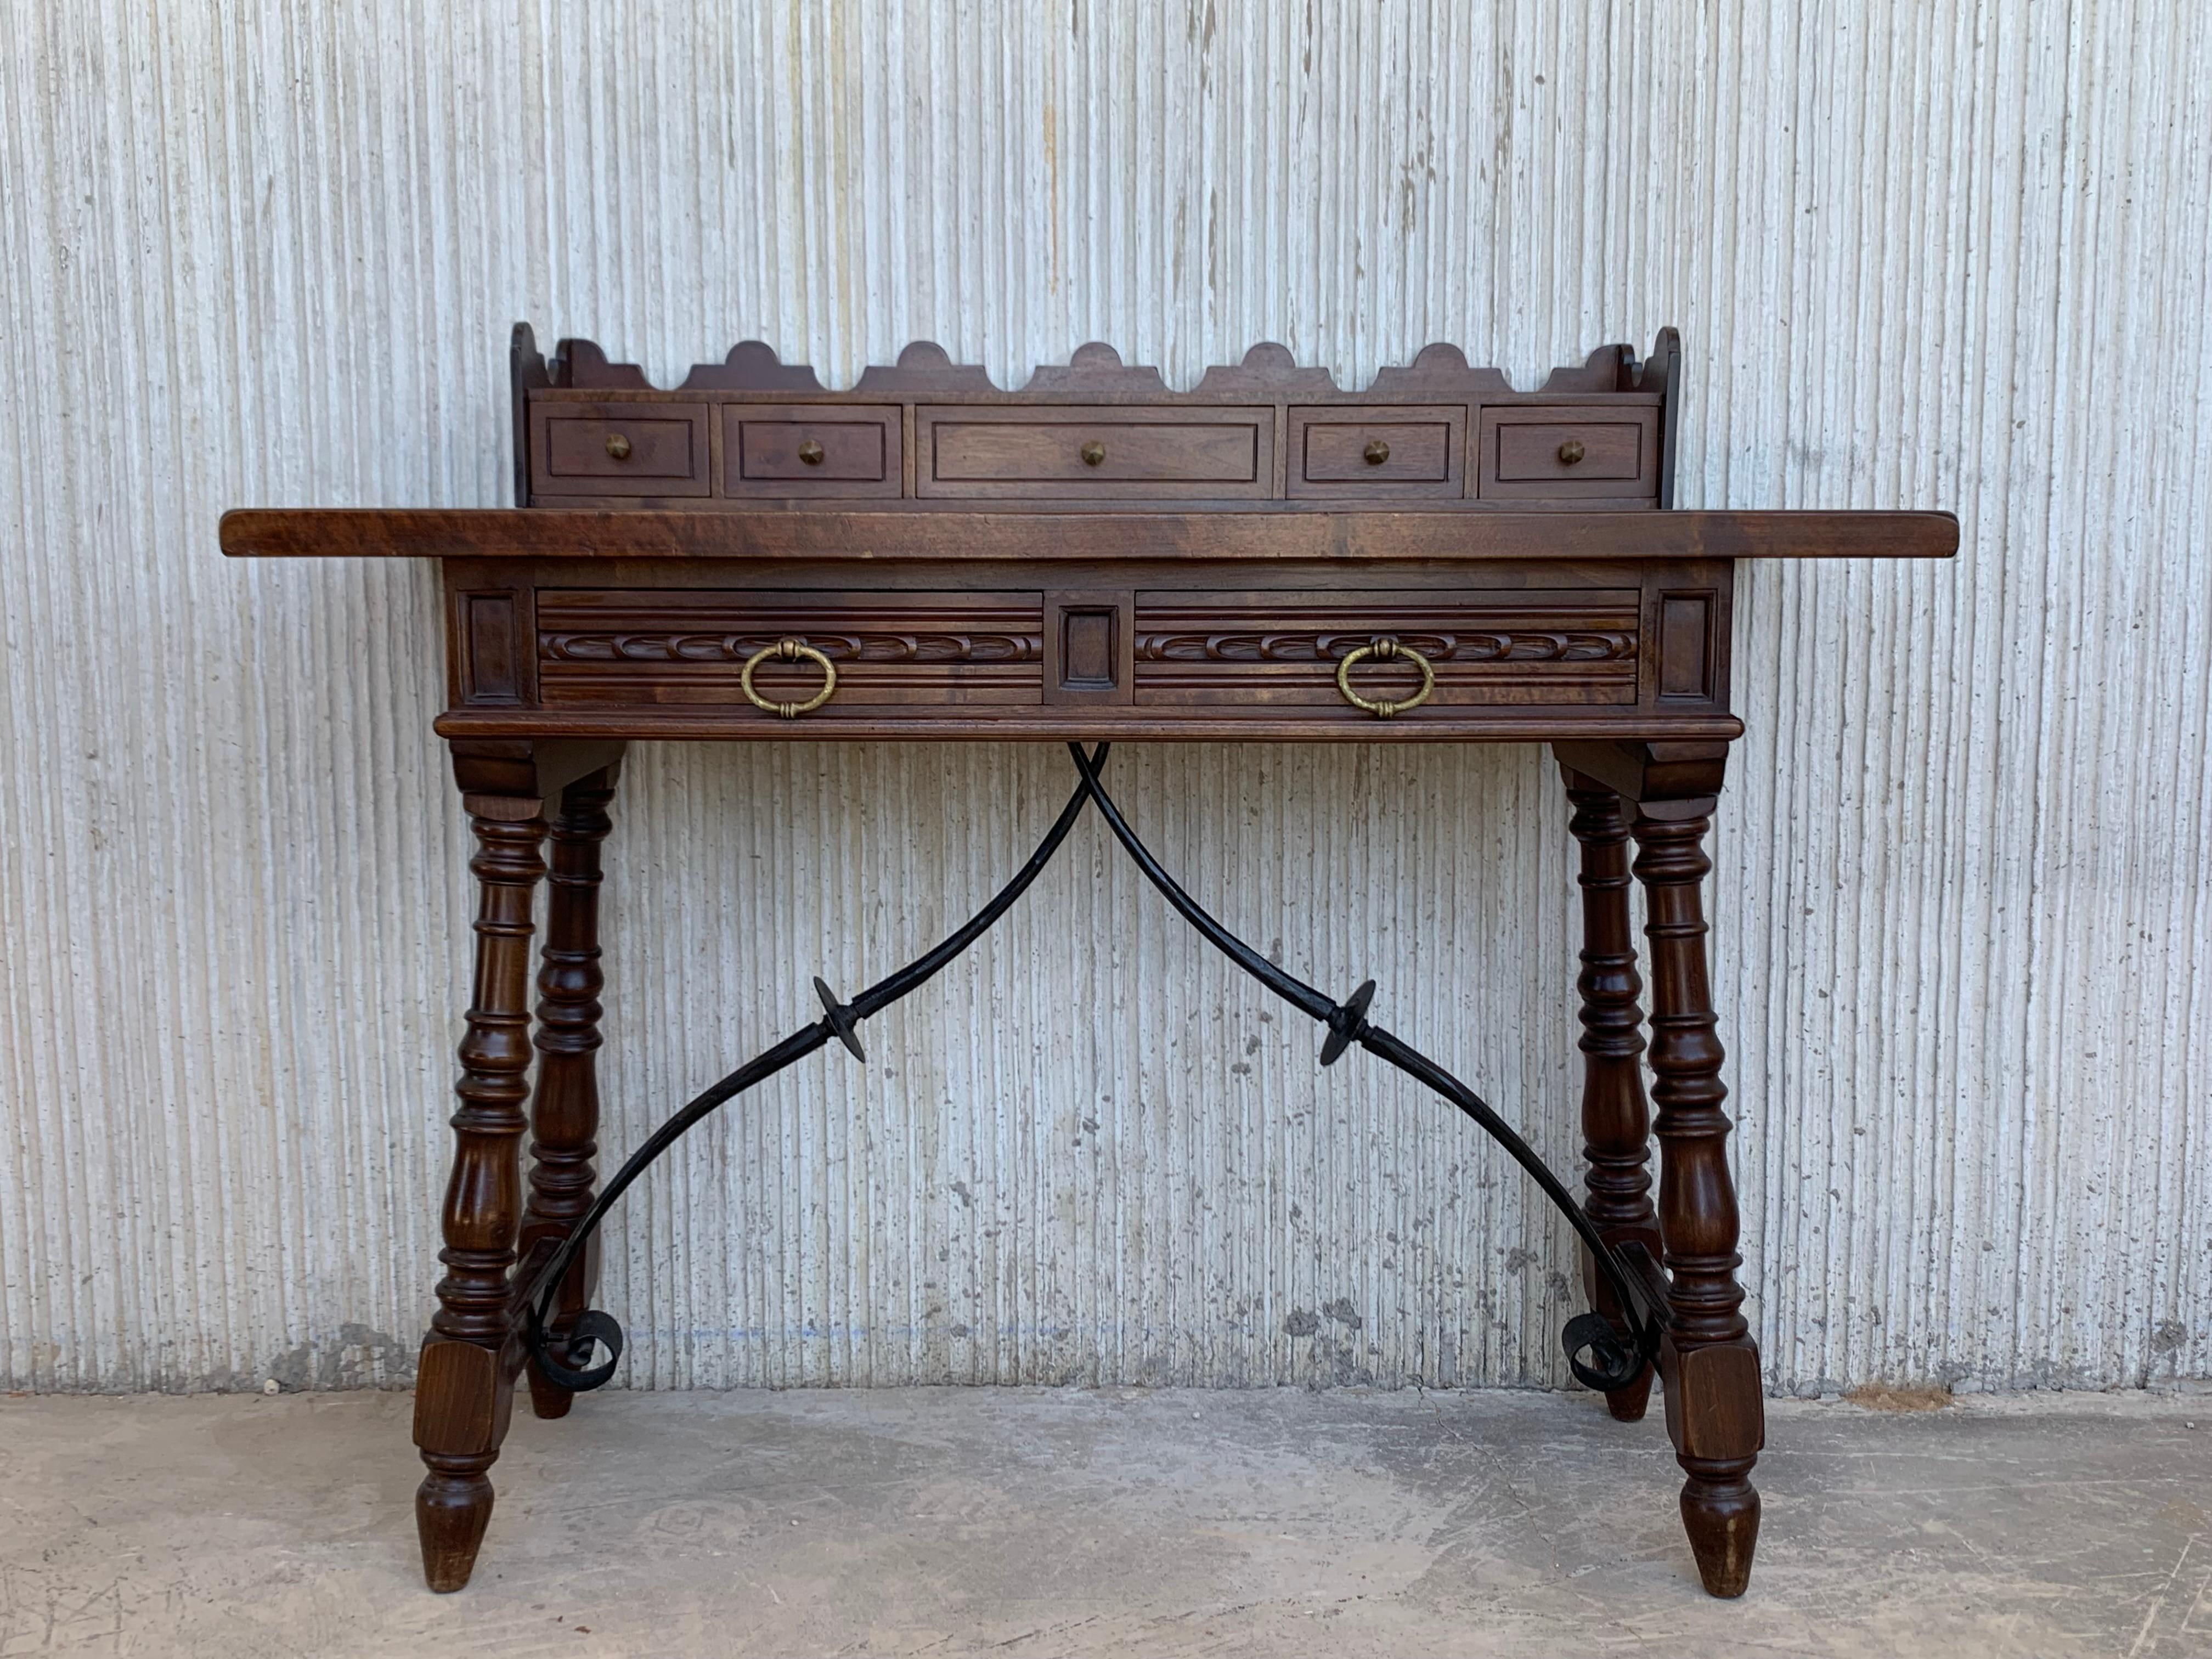 19th Century Catalan Spanish Lady Desk or Console Table in Carved Walnut and Iron Stretcher